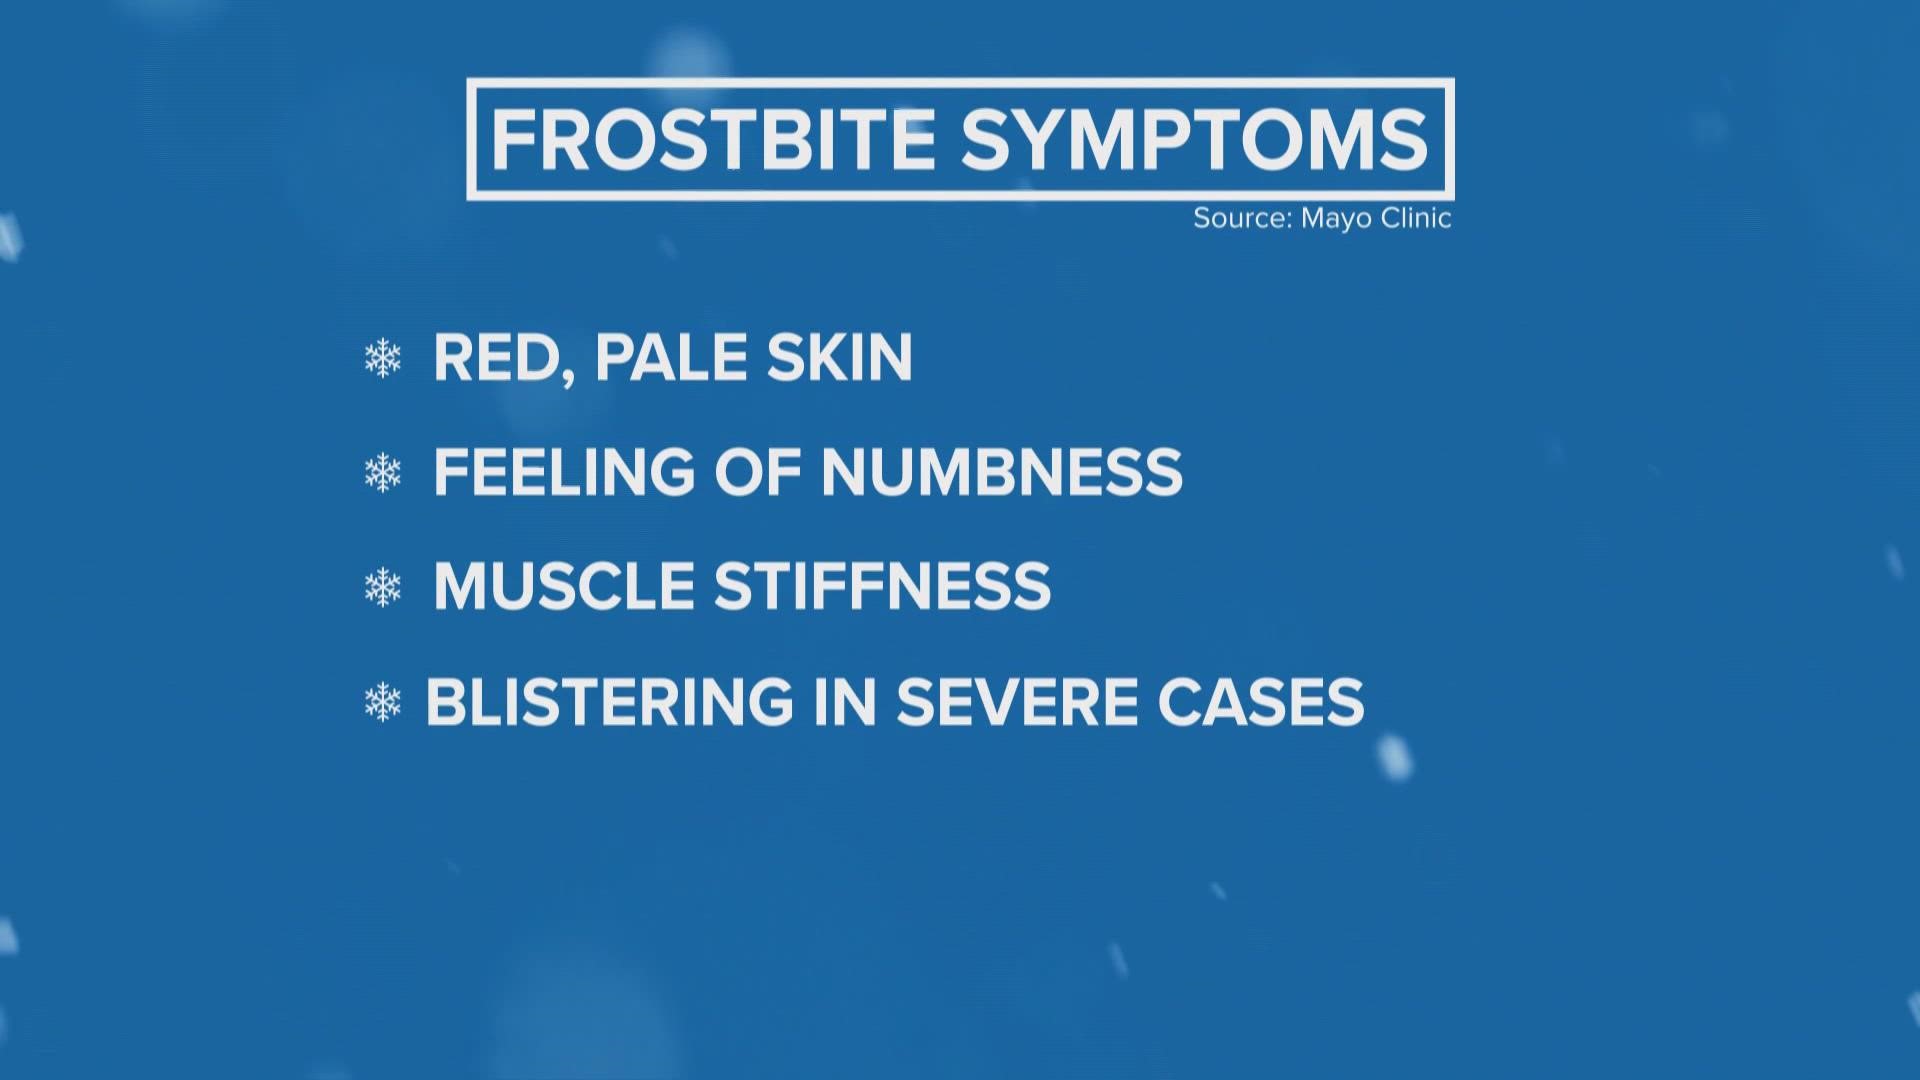 9NEWS Meteorologist Cory Reppenhagen joins us to explain some of the science behind frostbite and the type of cold weather exposure expected over the next few days.